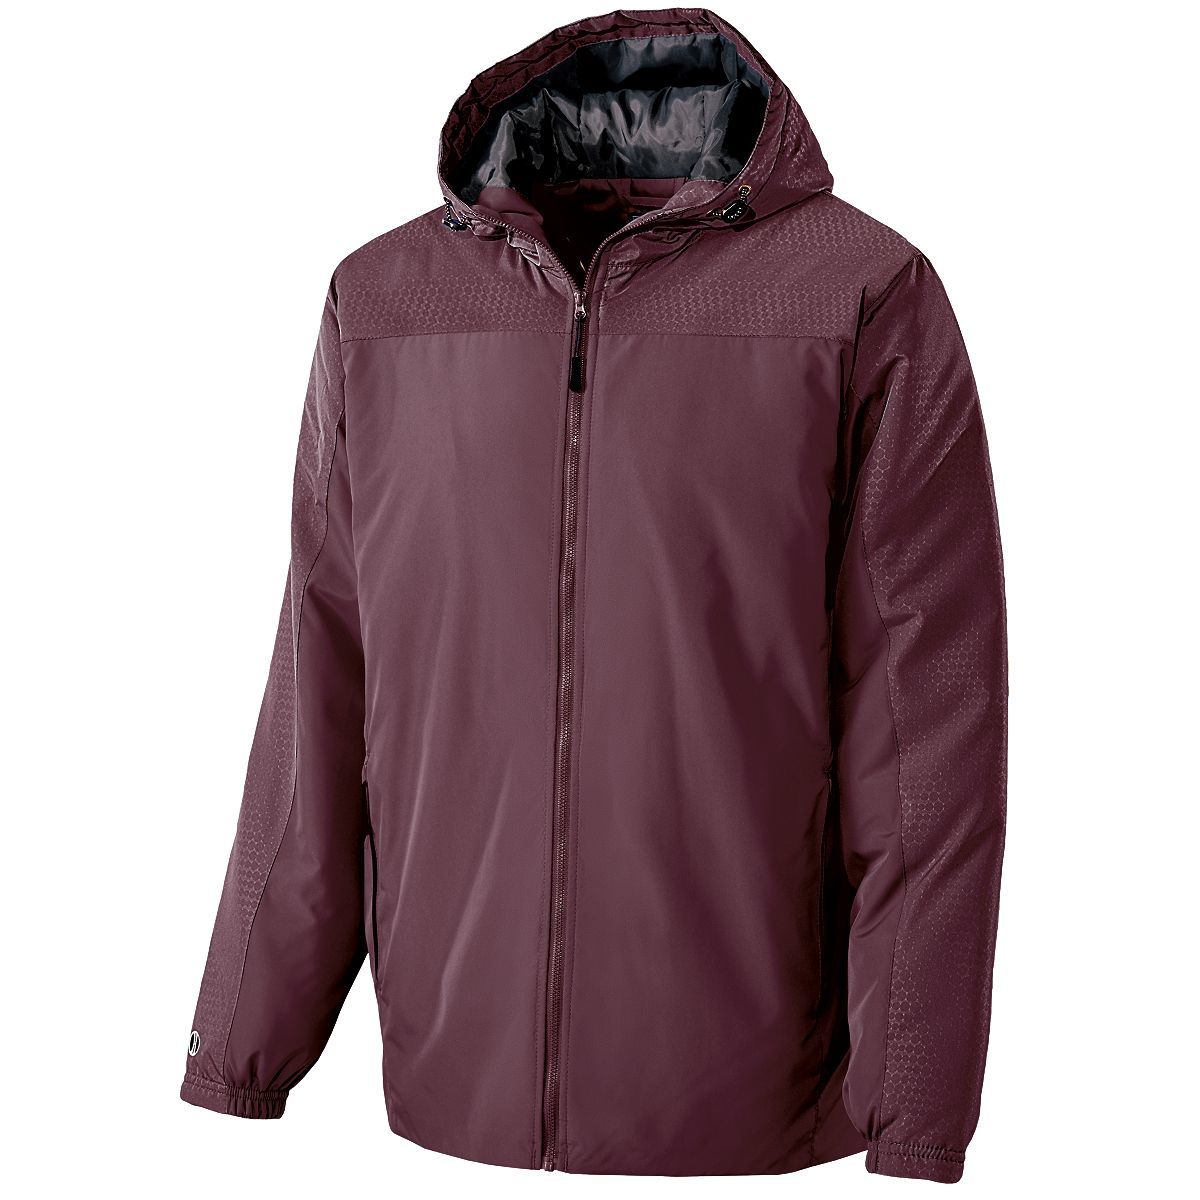 Holloway Bionic Hooded Jacket in Maroon/Carbon  -Part of the Adult, Adult-Jacket, Holloway, Outerwear product lines at KanaleyCreations.com